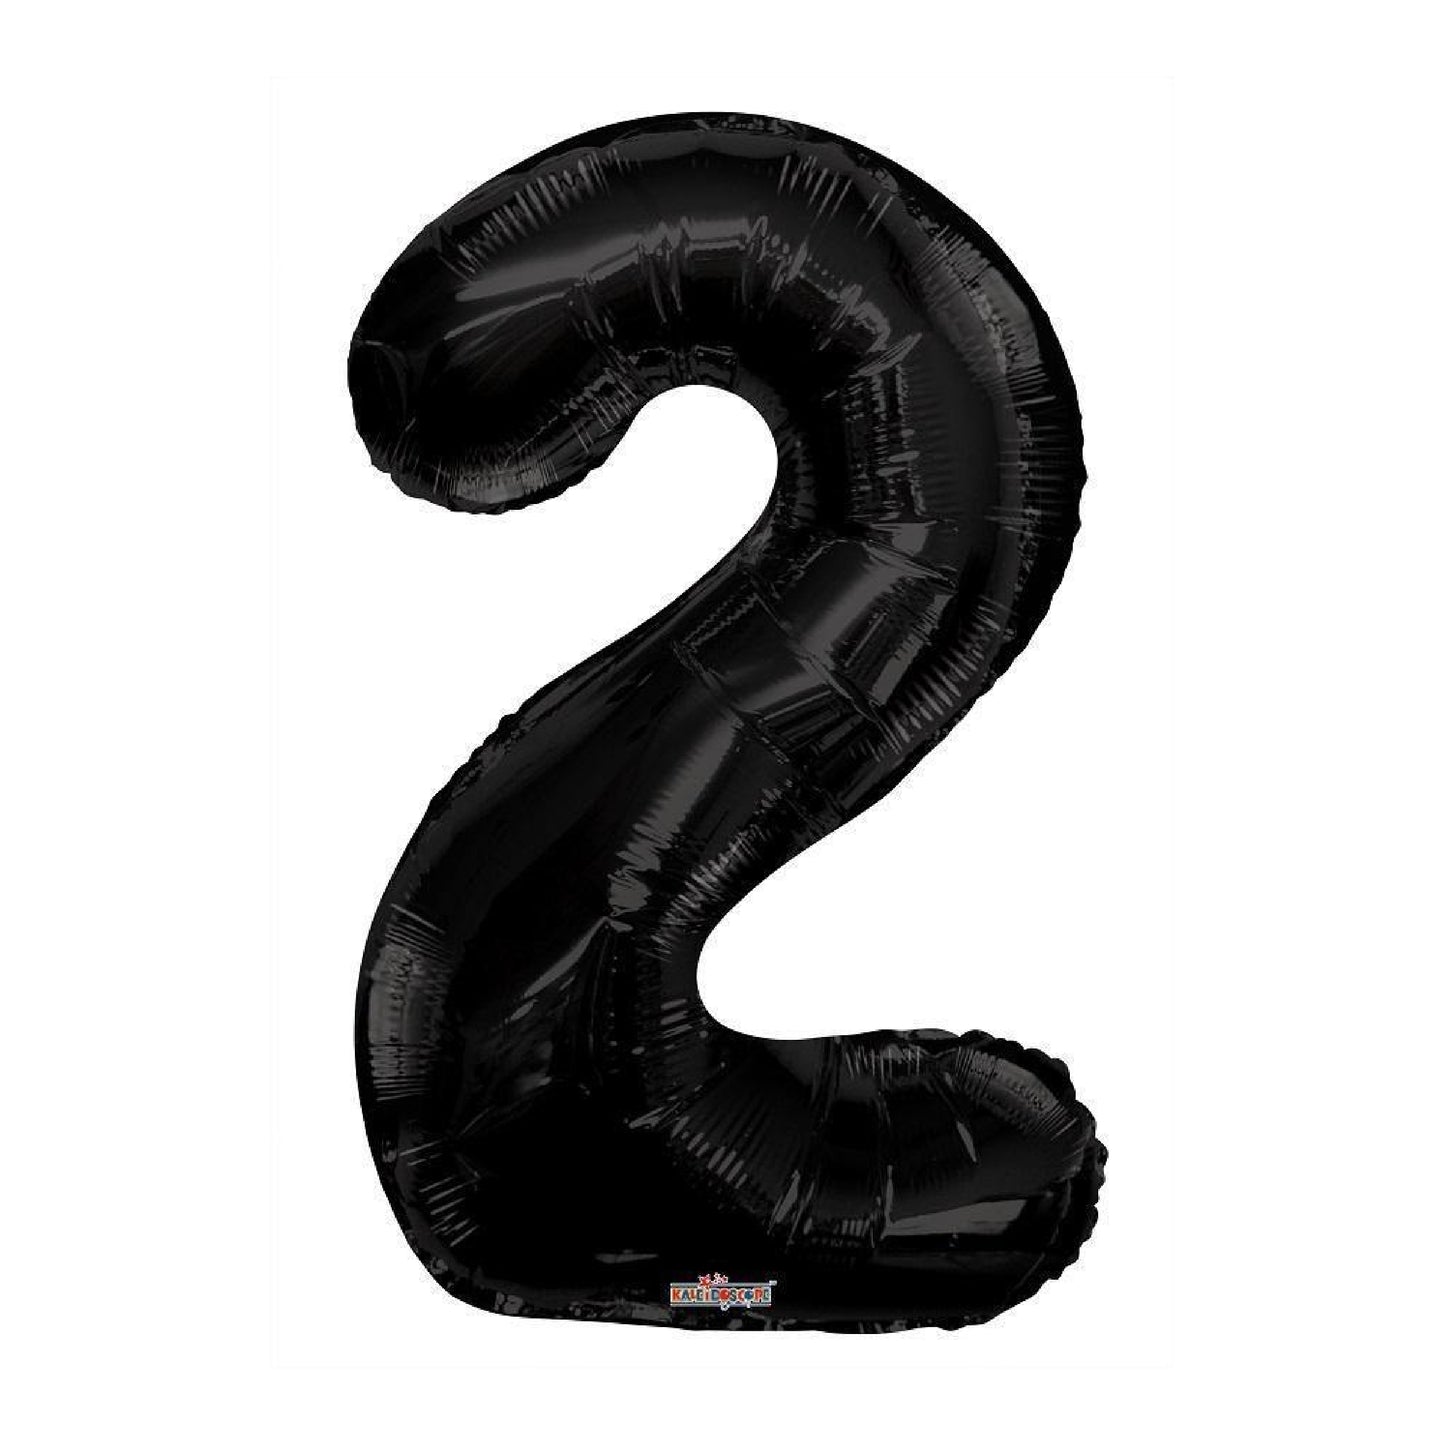 34 inch Black Balloon Number 2 Helium filled